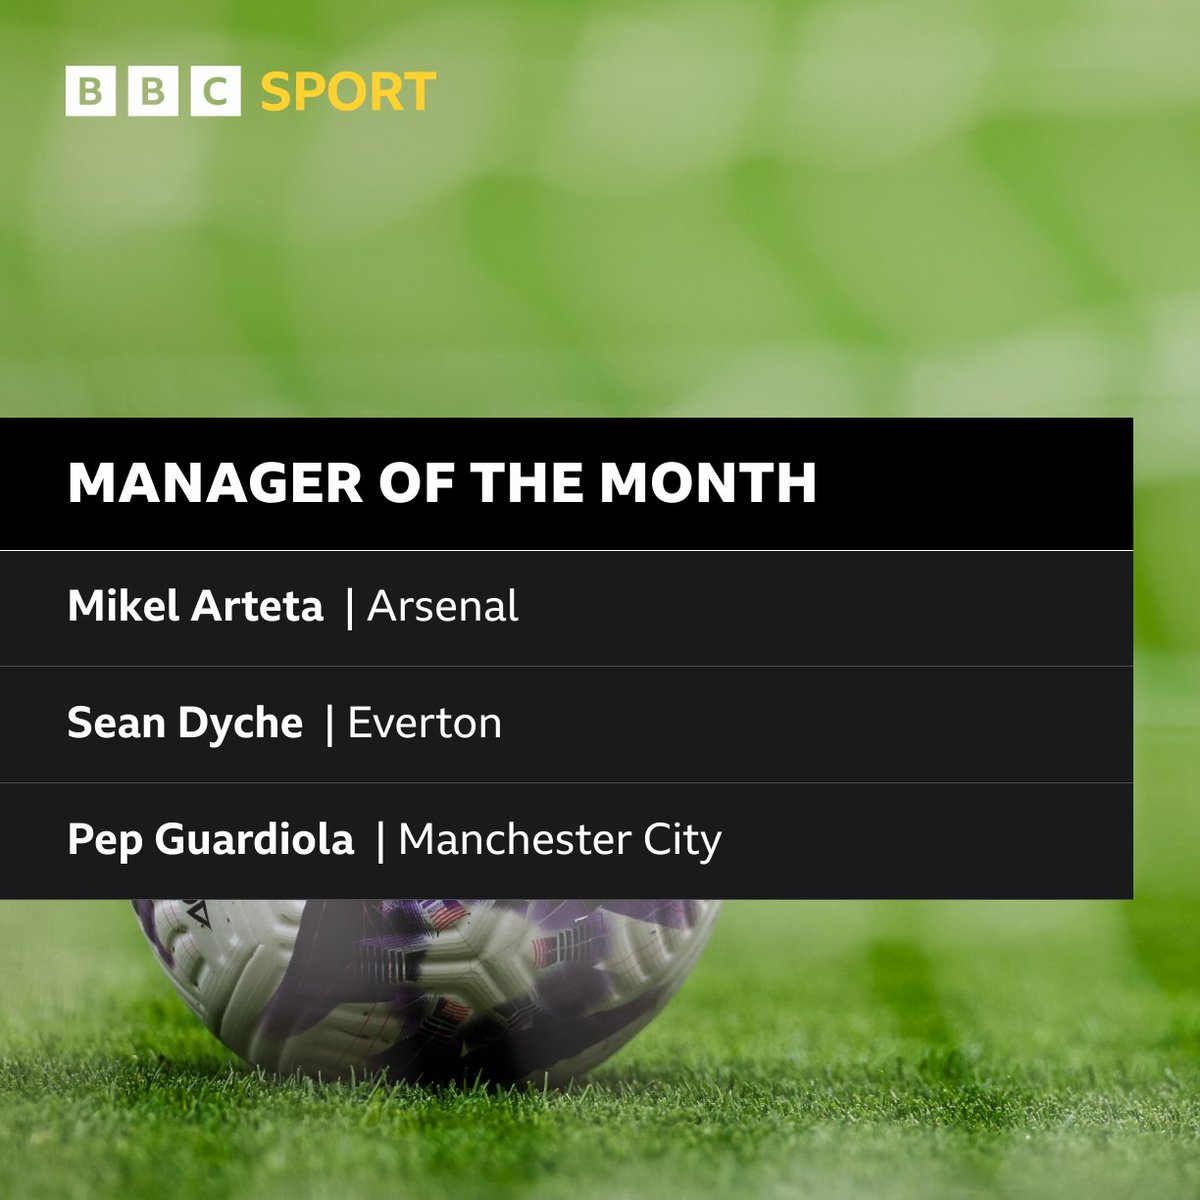 🏆 #EFC's @JPickford1 has been nominated for the Premier League Player of the Month award for April, while Sean Dyche is up for Manager of the Month

#⃣ #PLAwards #TotalSport